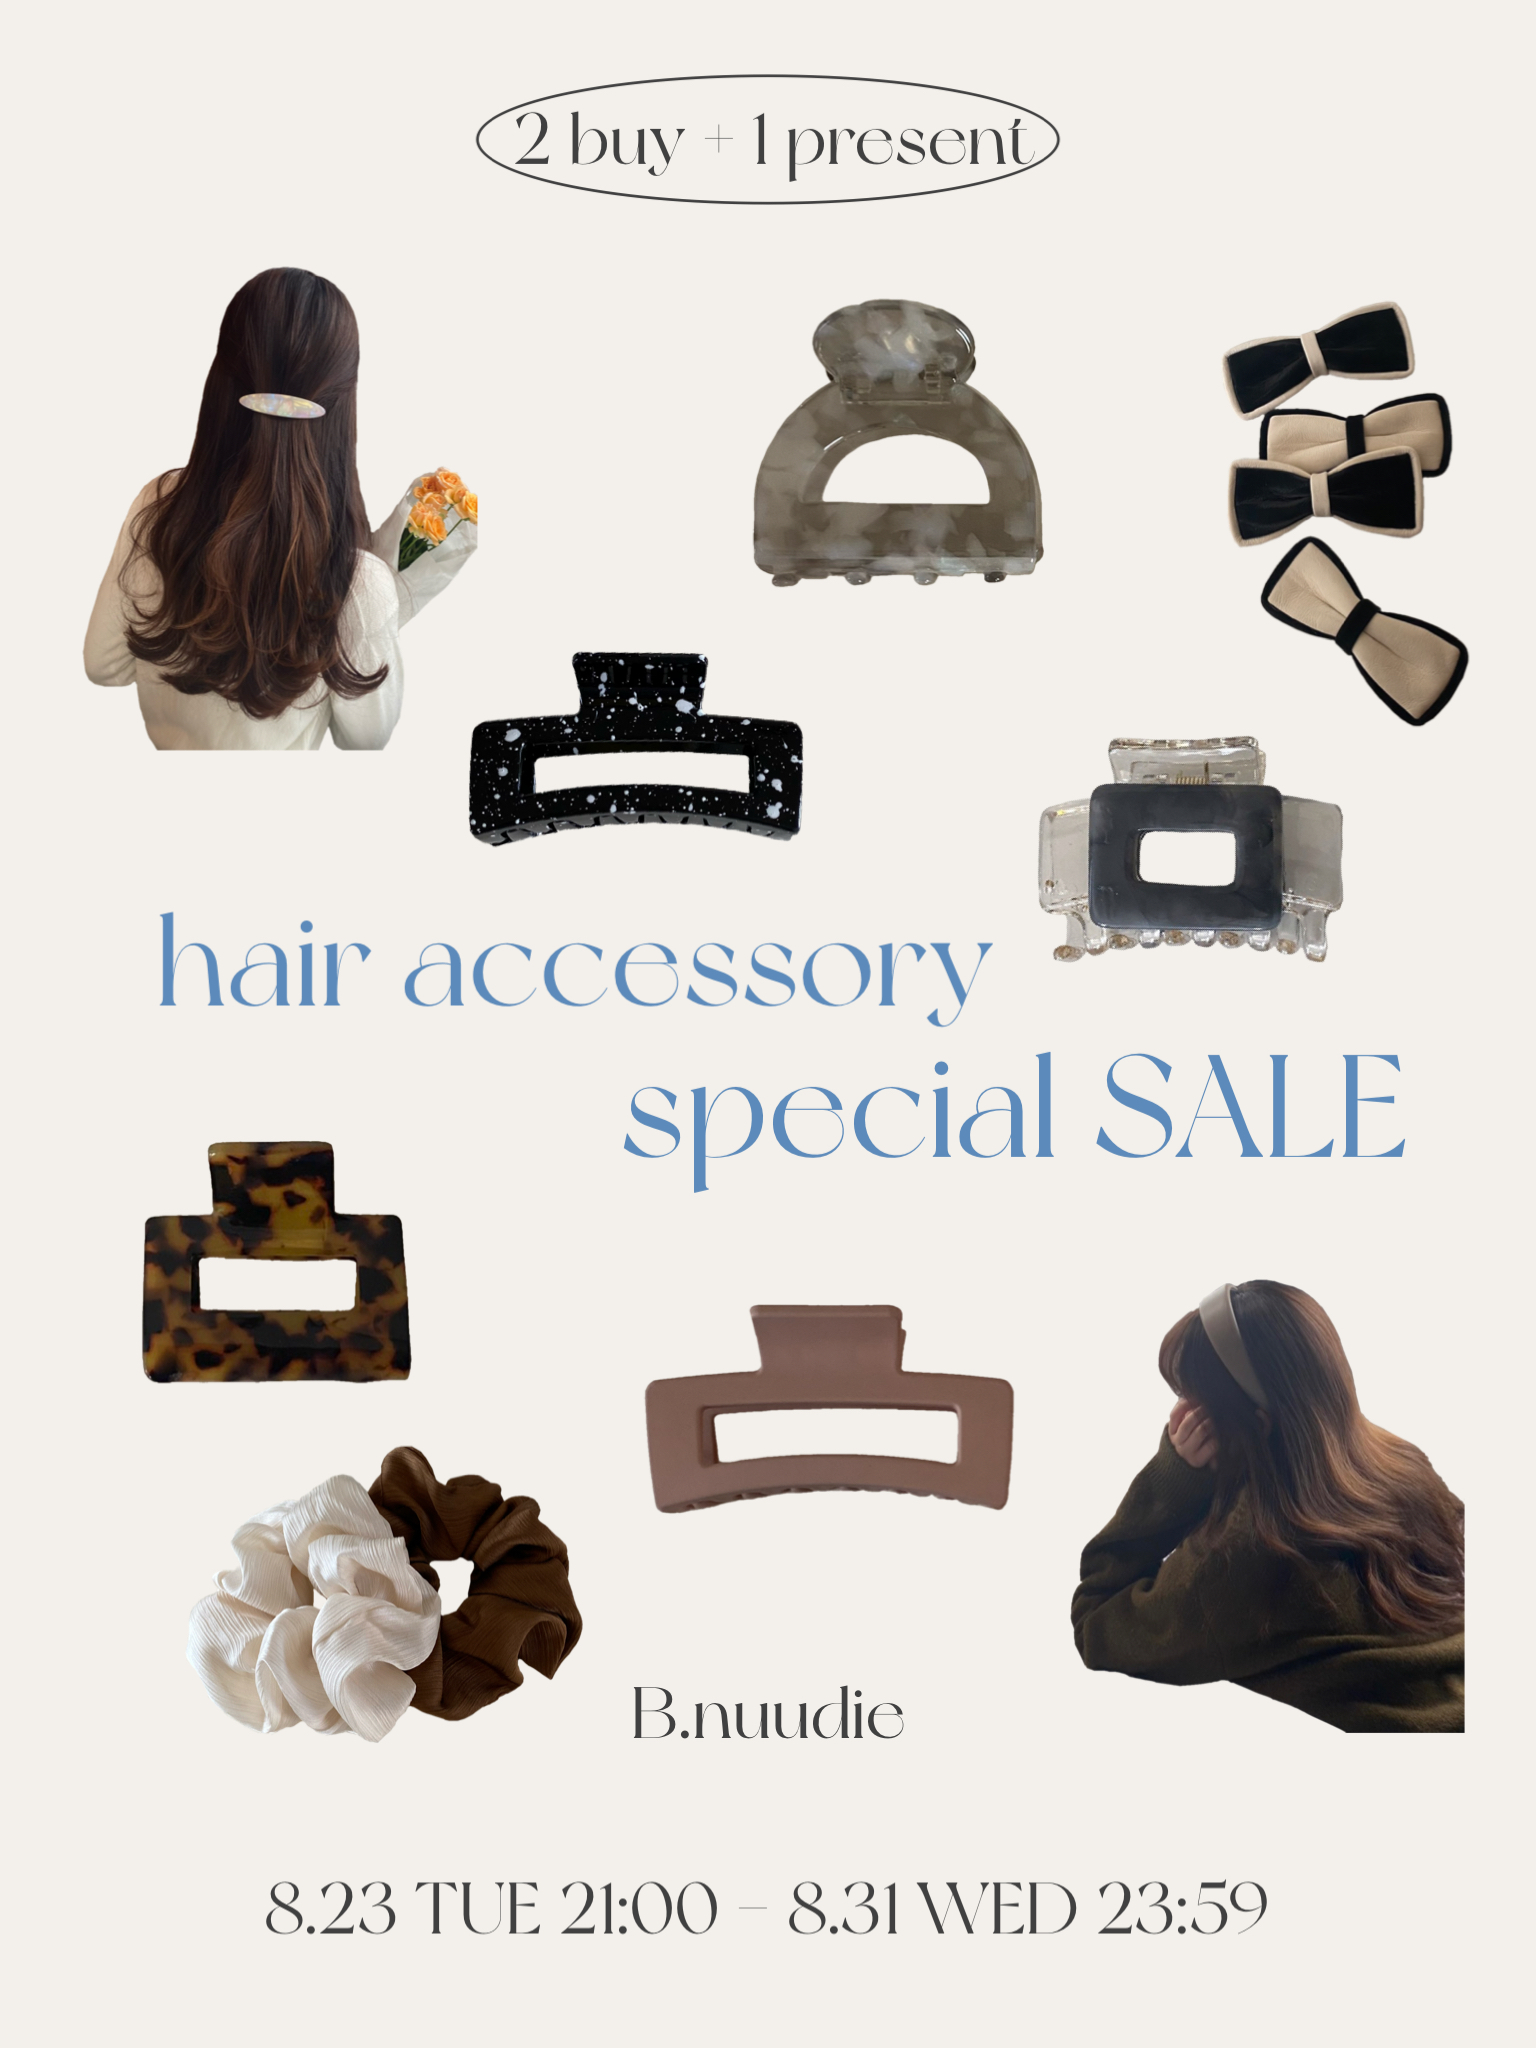 ［hair accessory special SALE］2 buy + 1 present